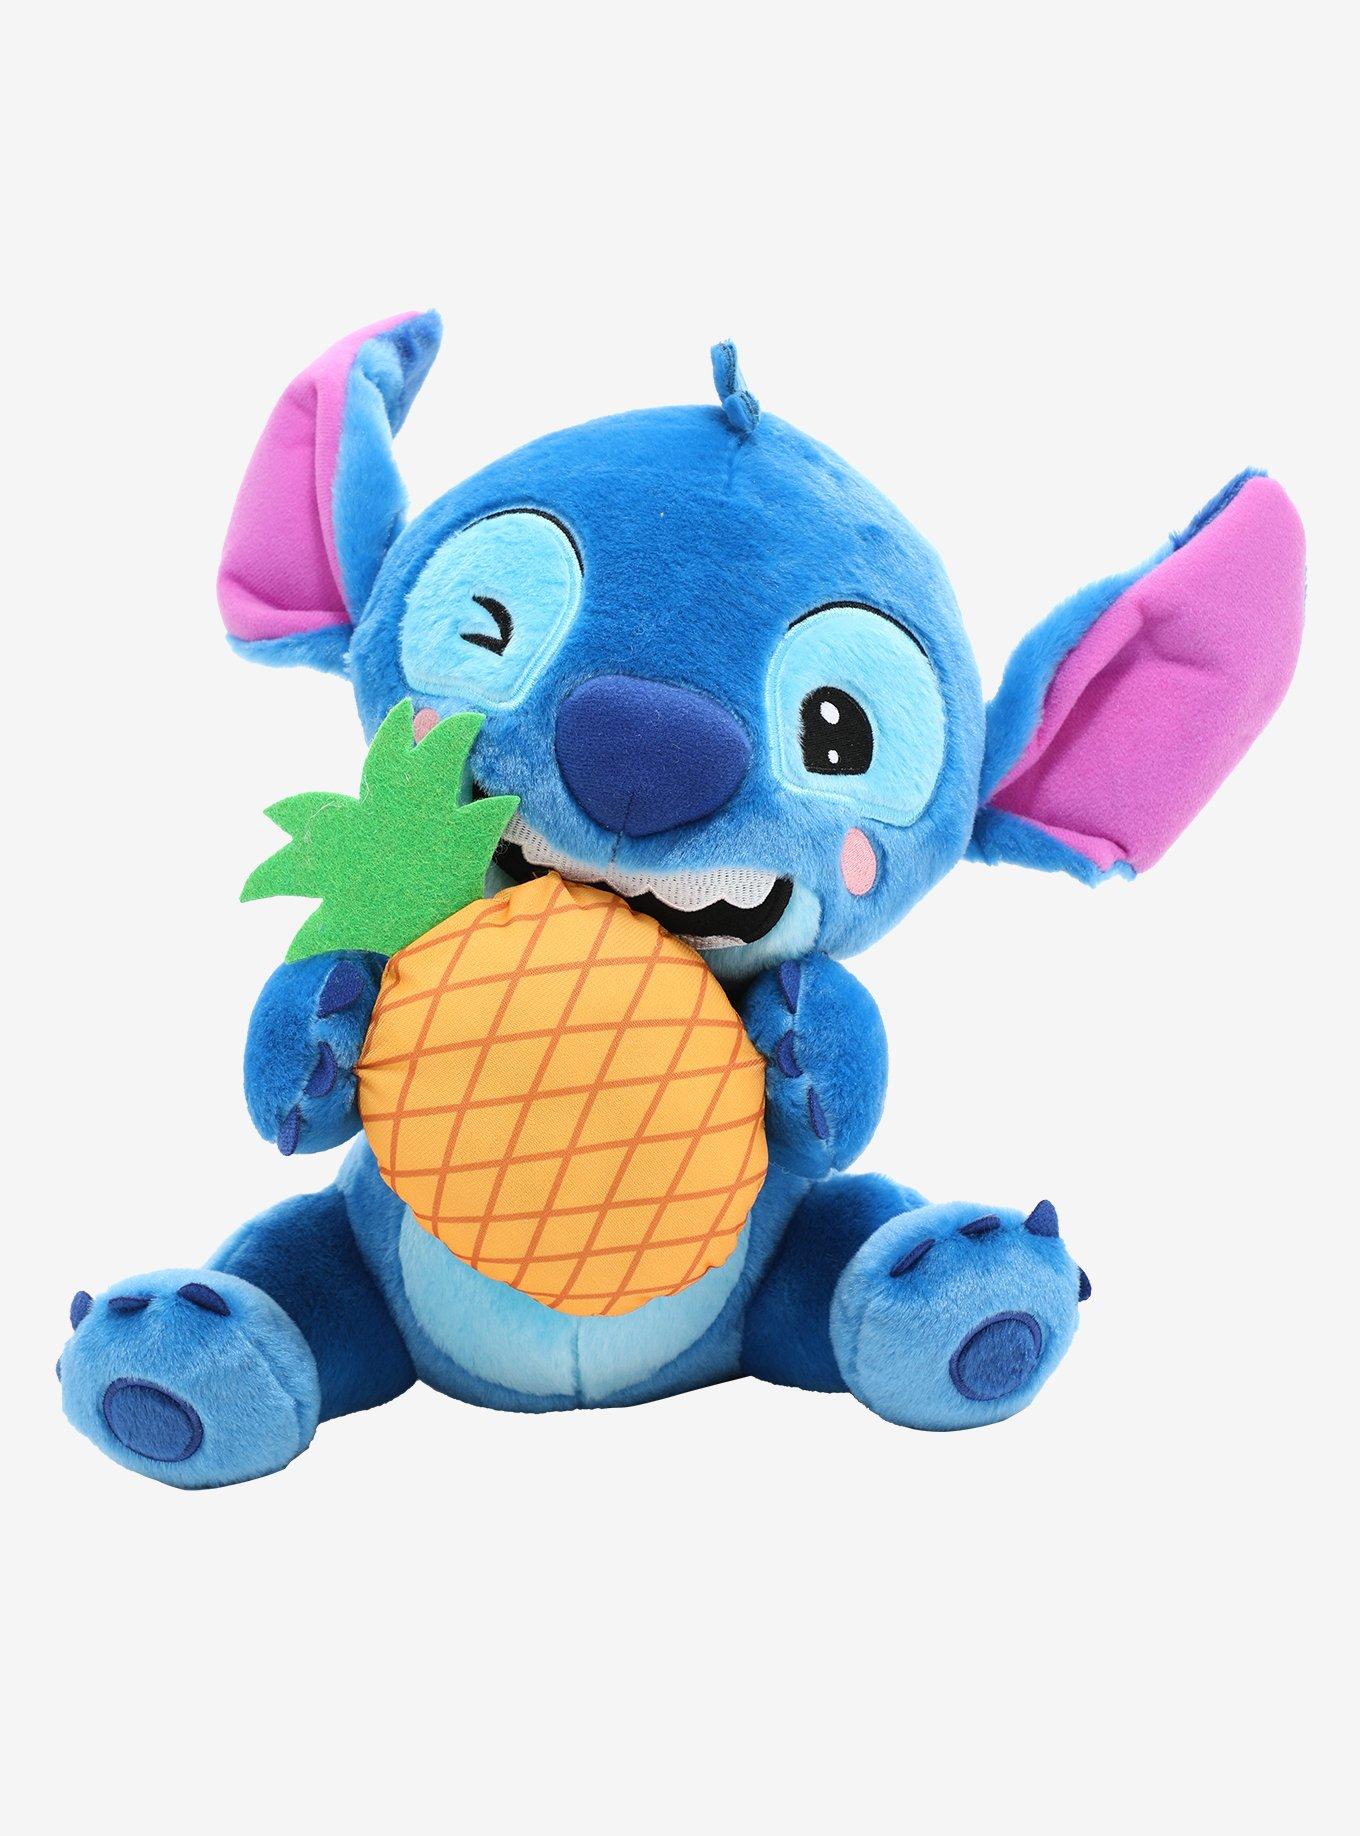 Official Lilo & Stitch Plush Toy 505430: Buy Online on Offer